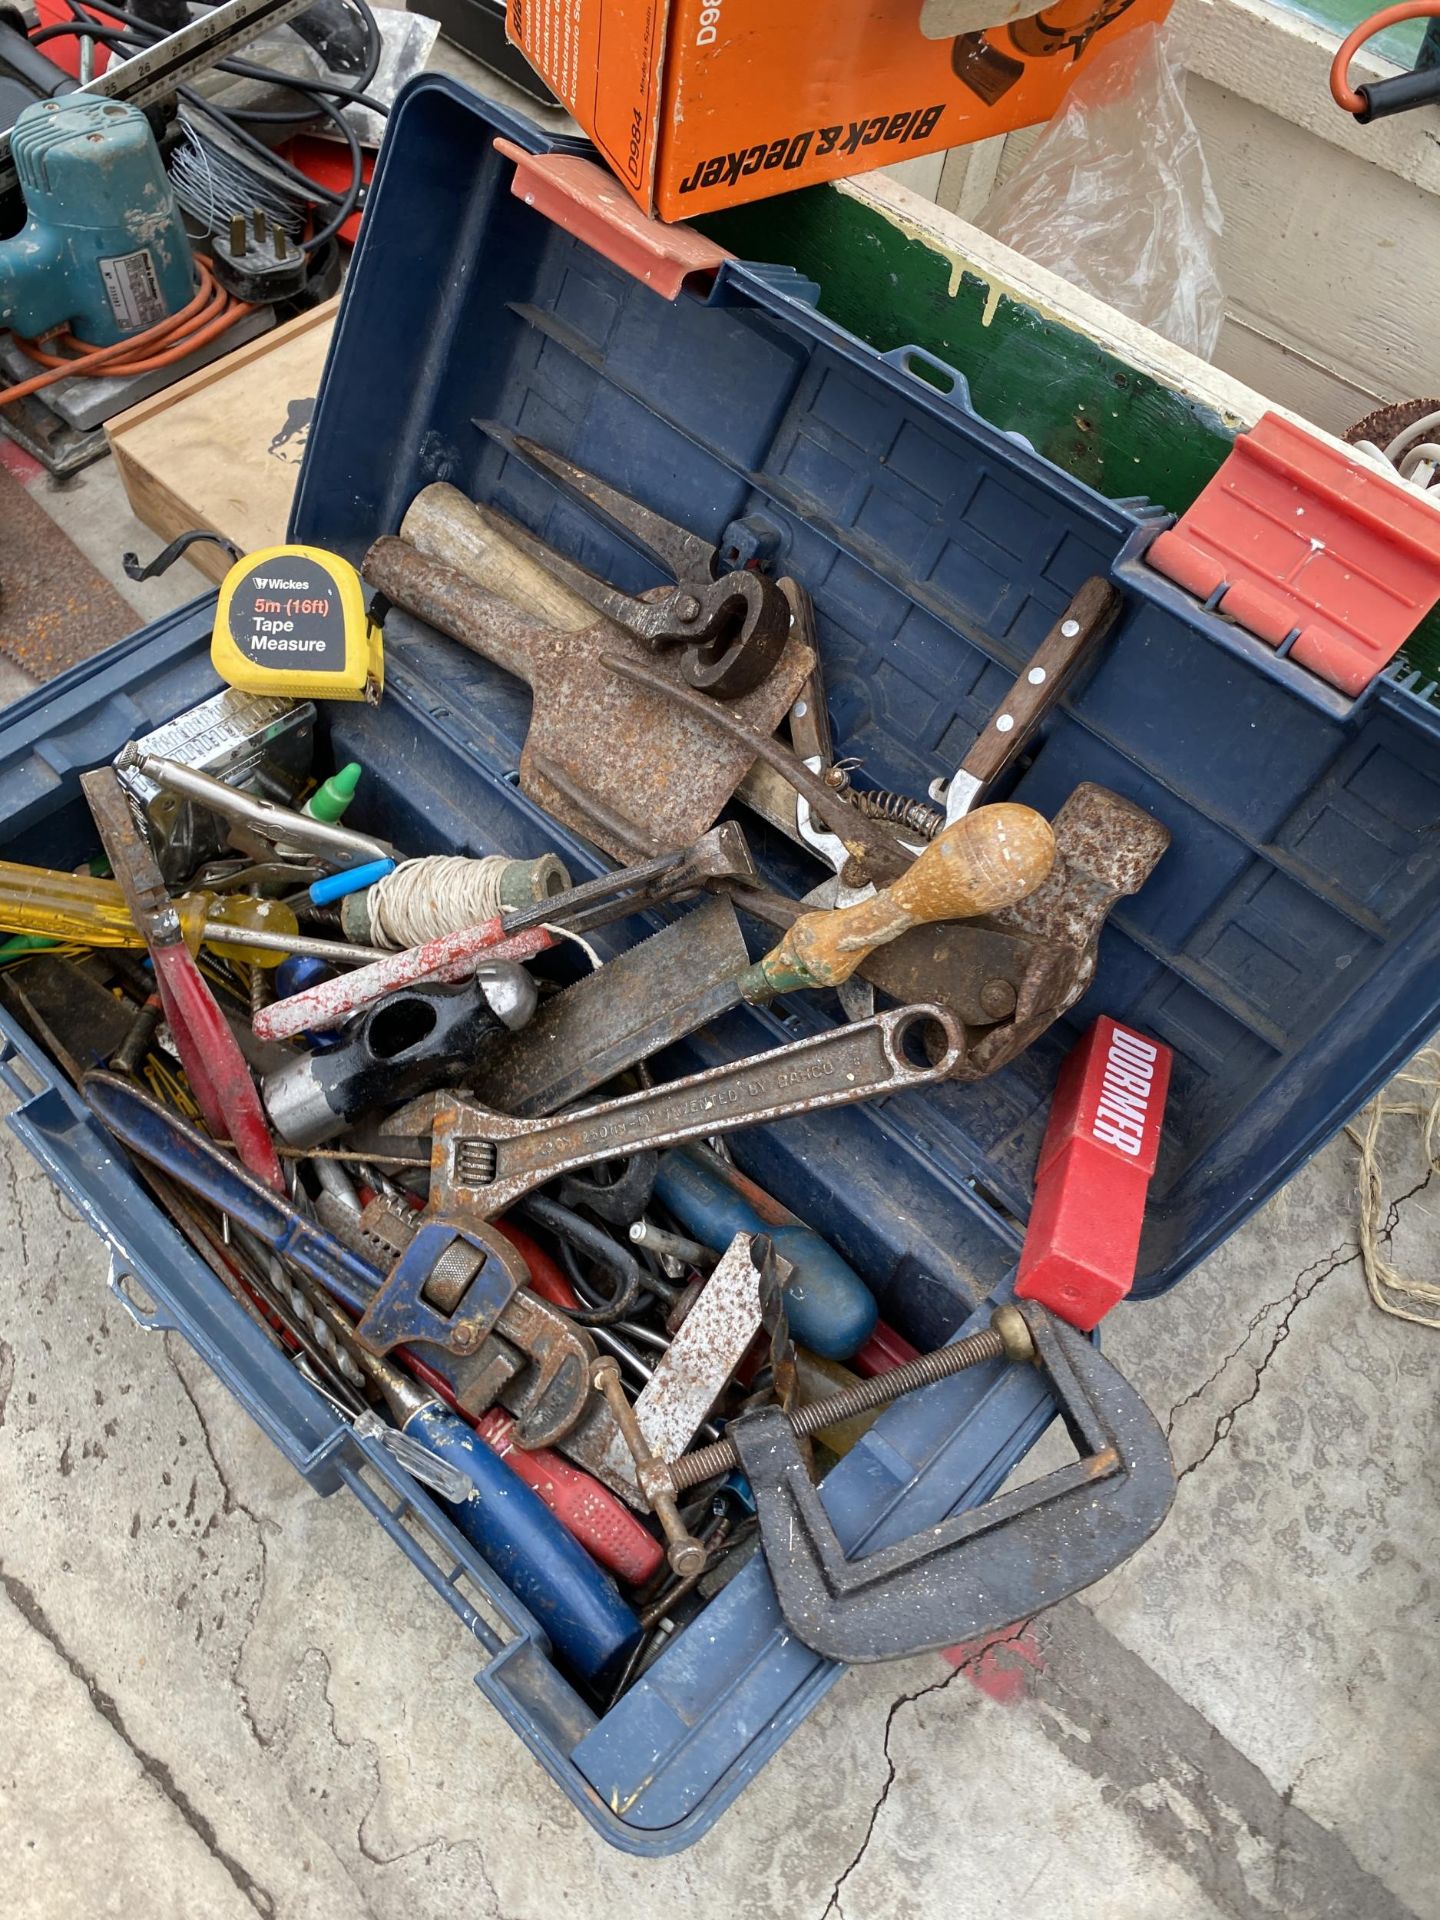 TWO TOOL BOXES CONTAINING VARIOUS TOOLS TO INCLUDE STILSENS, PLIERS AND A HAMMER ETC - Image 2 of 8